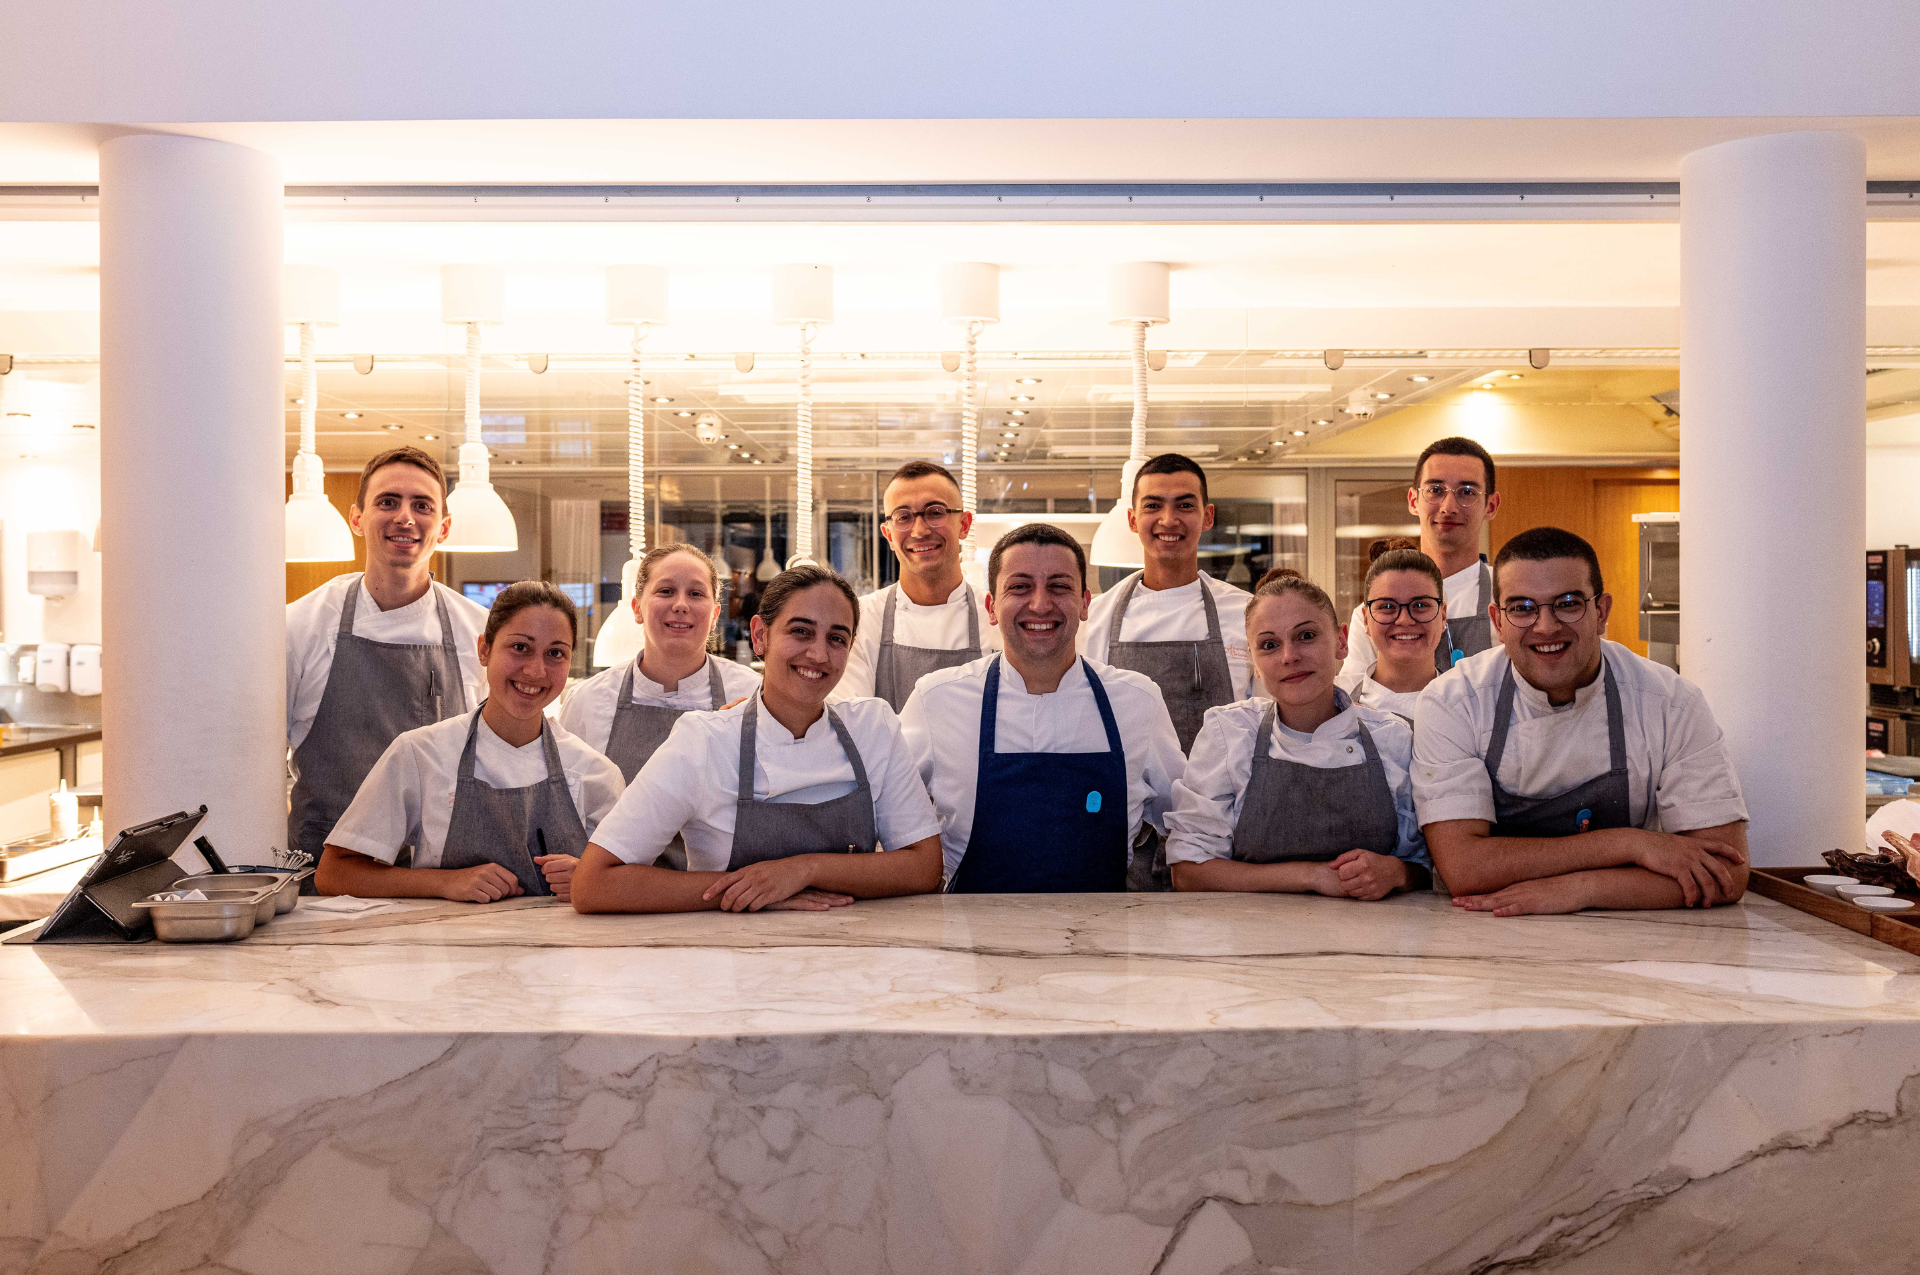 Ceto's kitchen team posing for the picture in front of the restaurant's kitchen